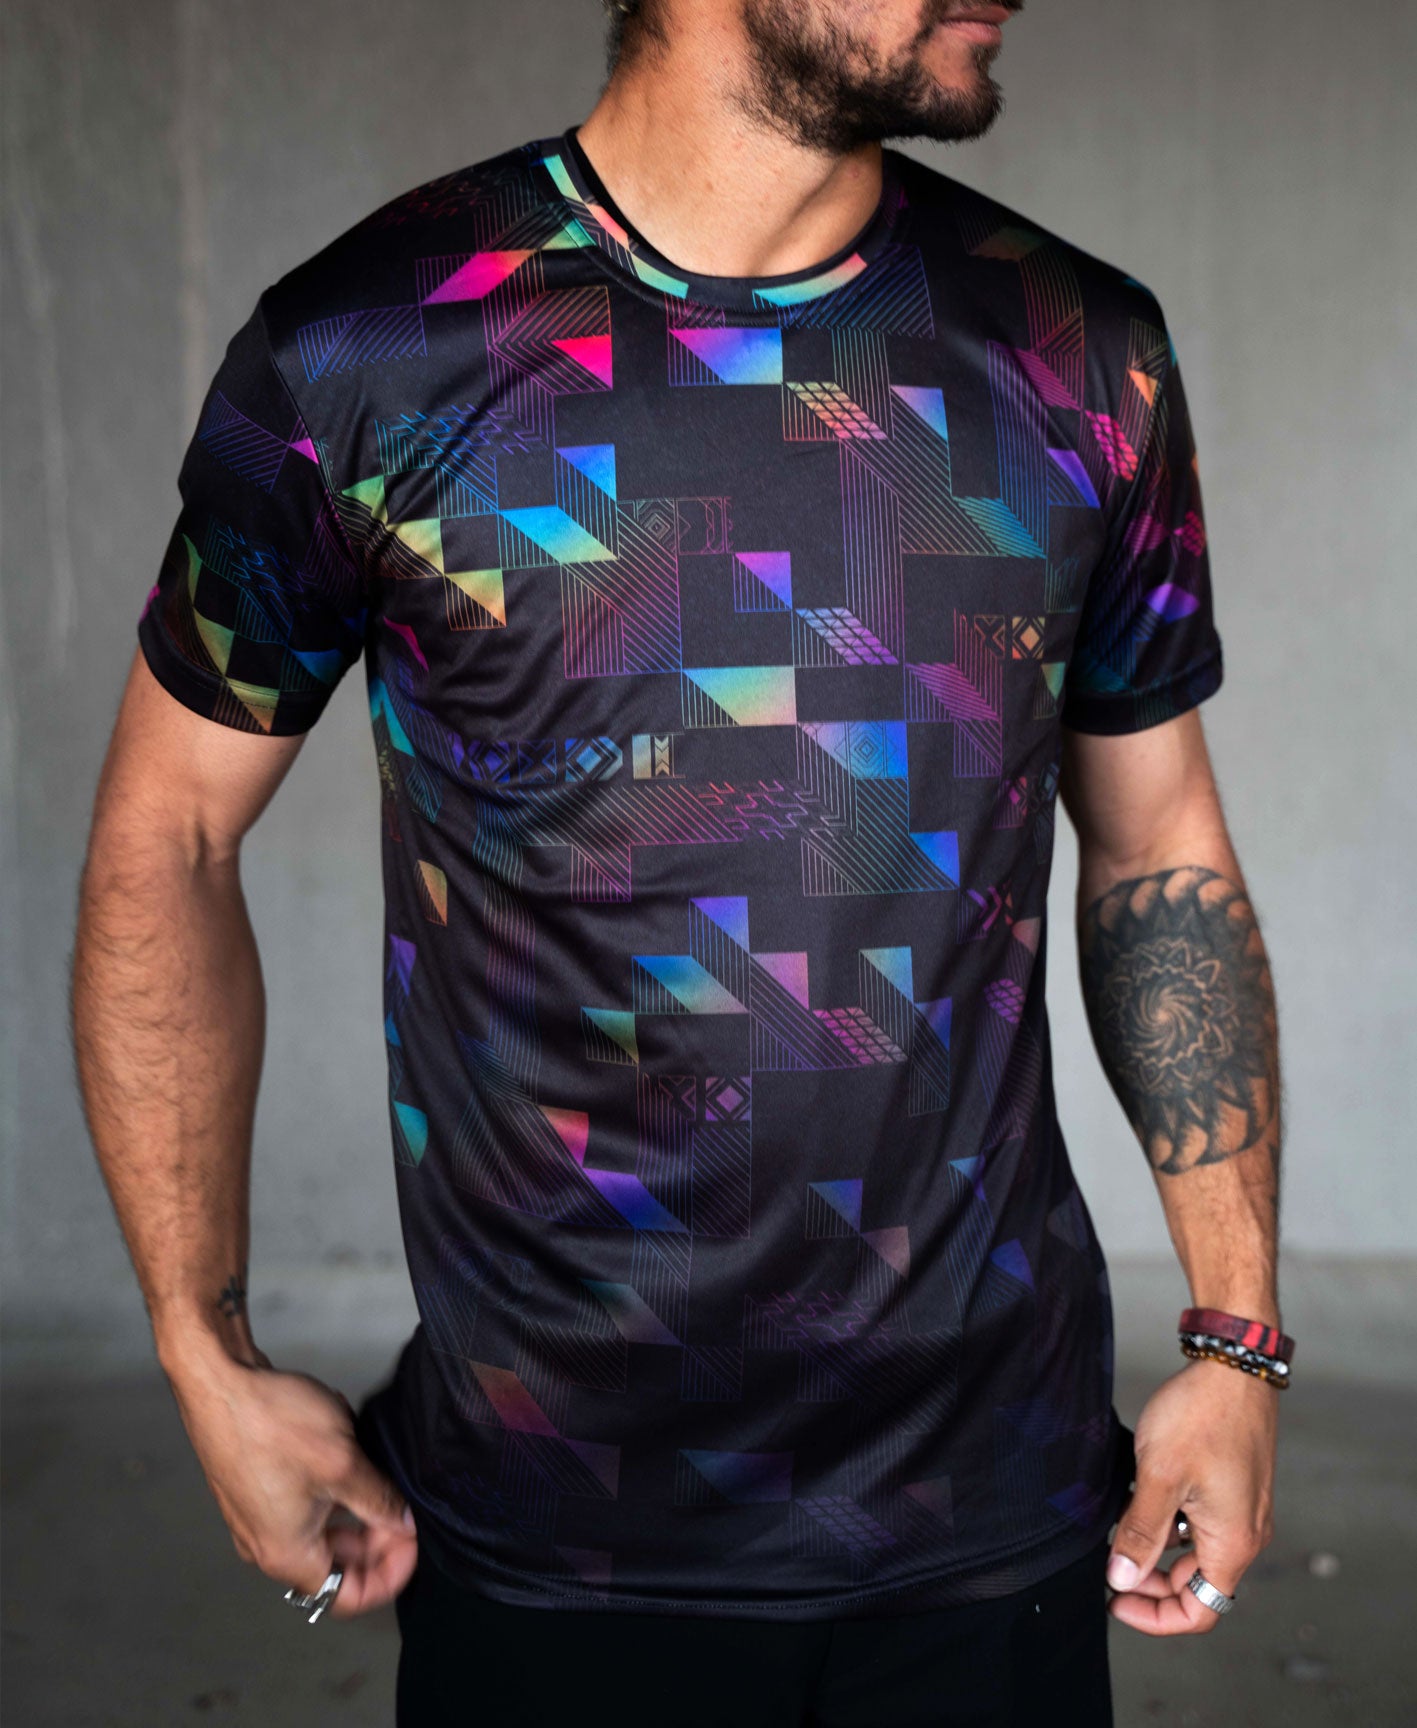 Prism Sublimation Tee by Threyda - Ships April